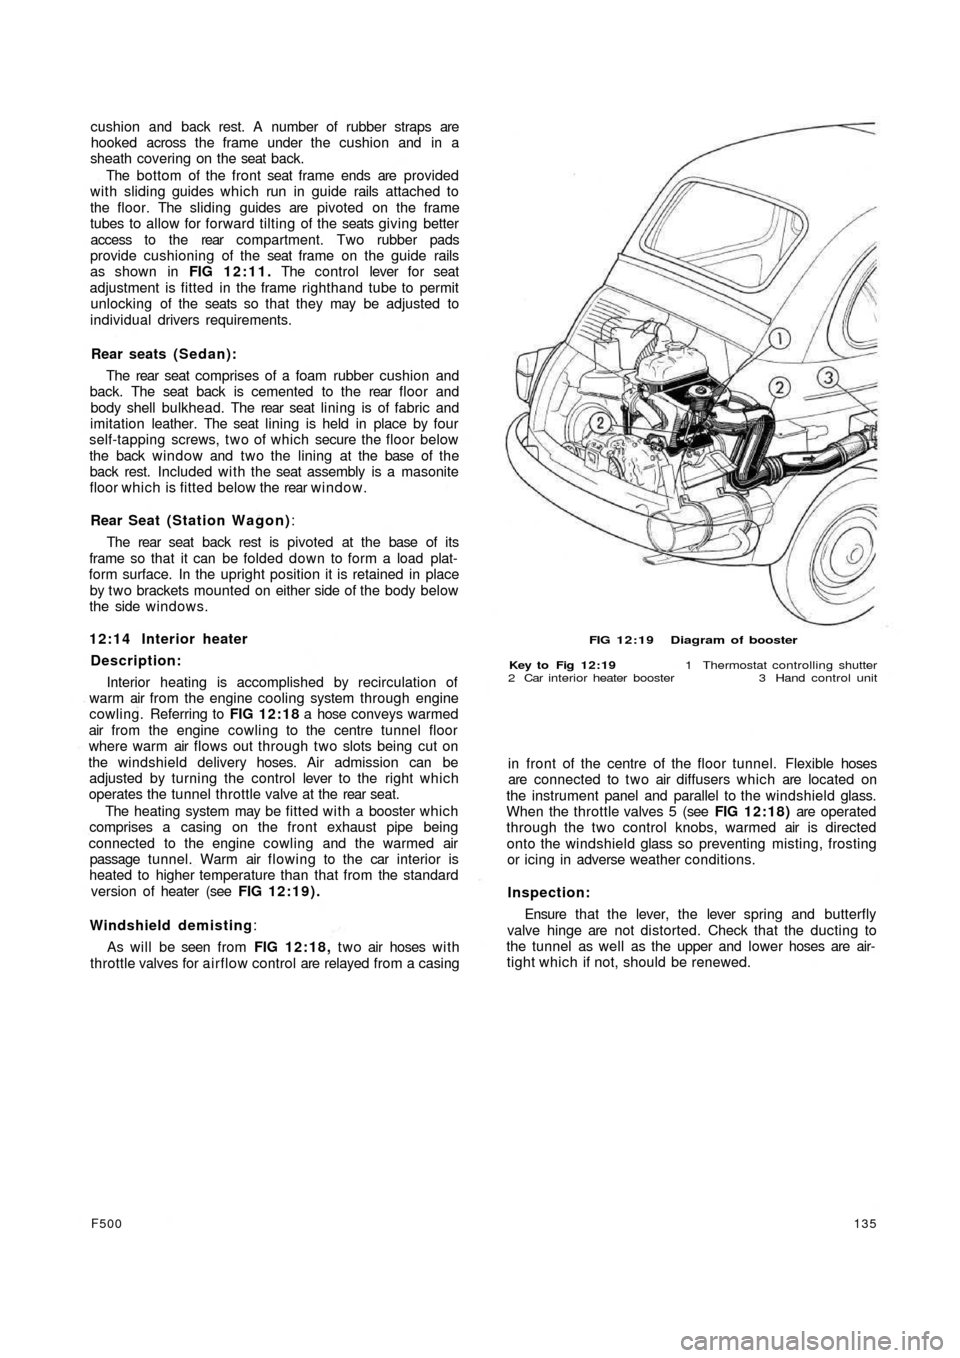 FIAT 500 1959 1.G Repair Manual cushion and back rest. A  number of rubber straps are
hooked across the frame under the cushion and in a
sheath covering on the seat back.
The bottom of the front seat frame ends are provided
with sli